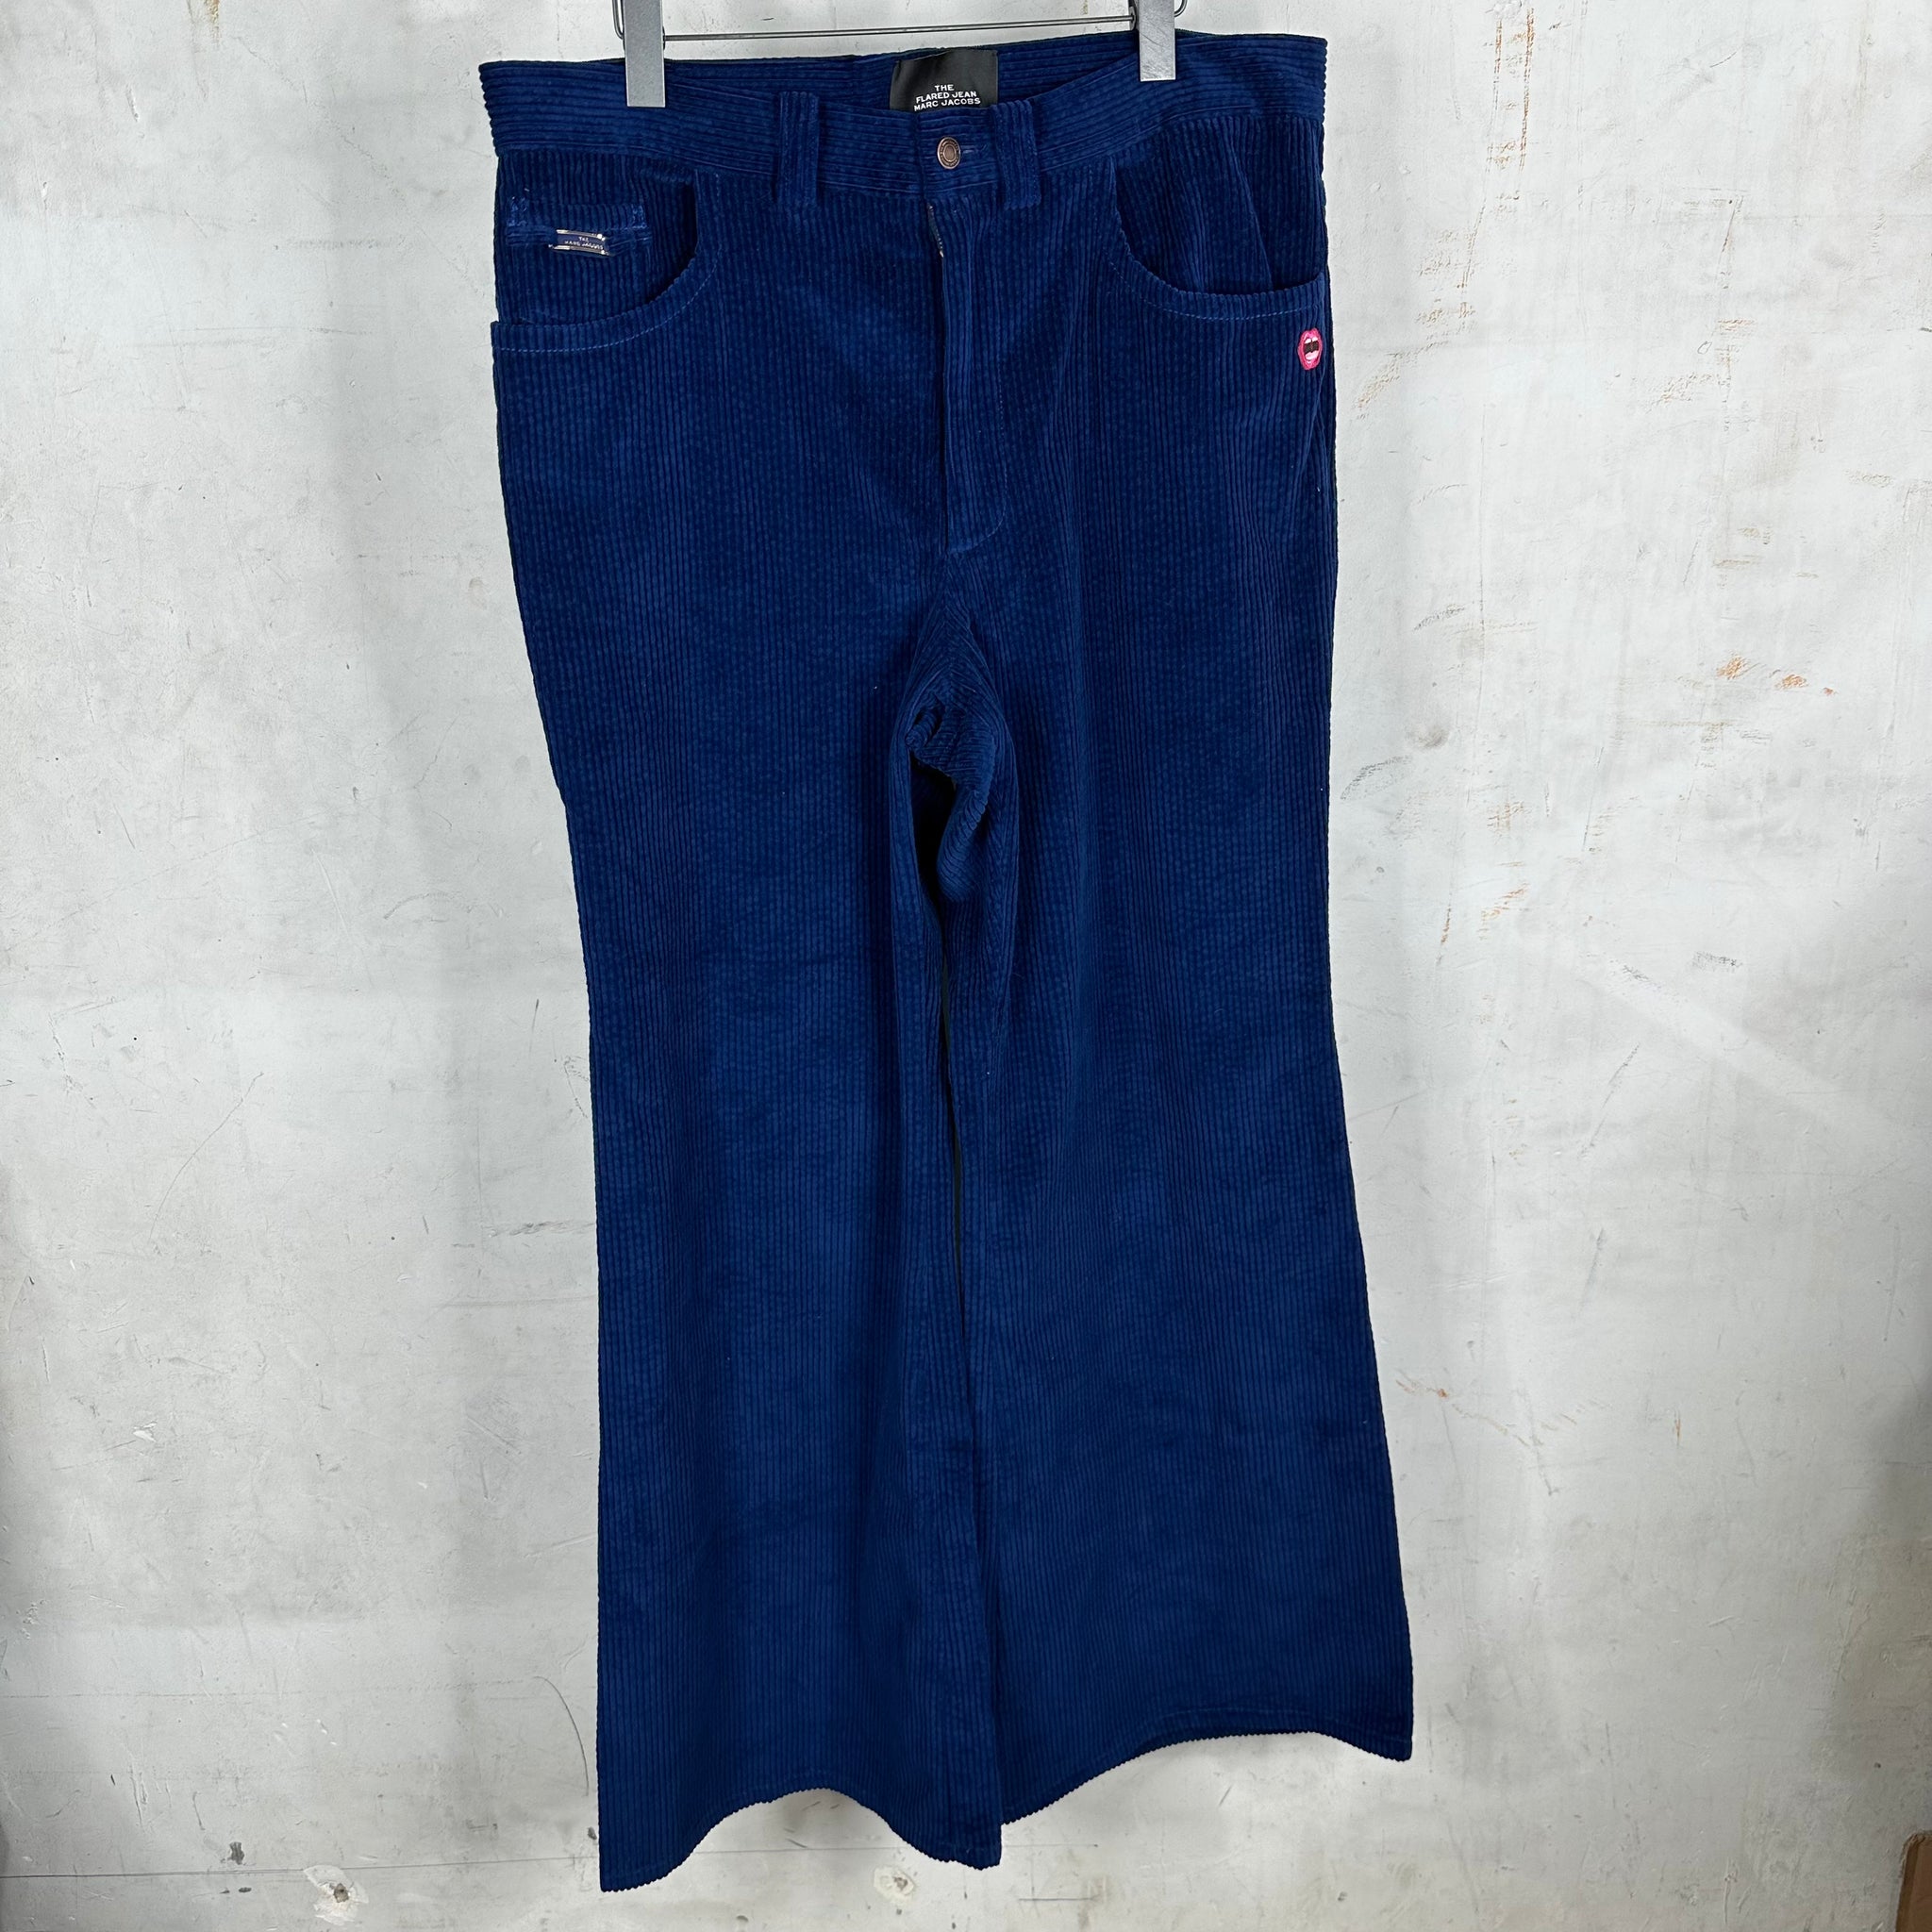 Marc Jacobs Blue Flared Cord Trousers